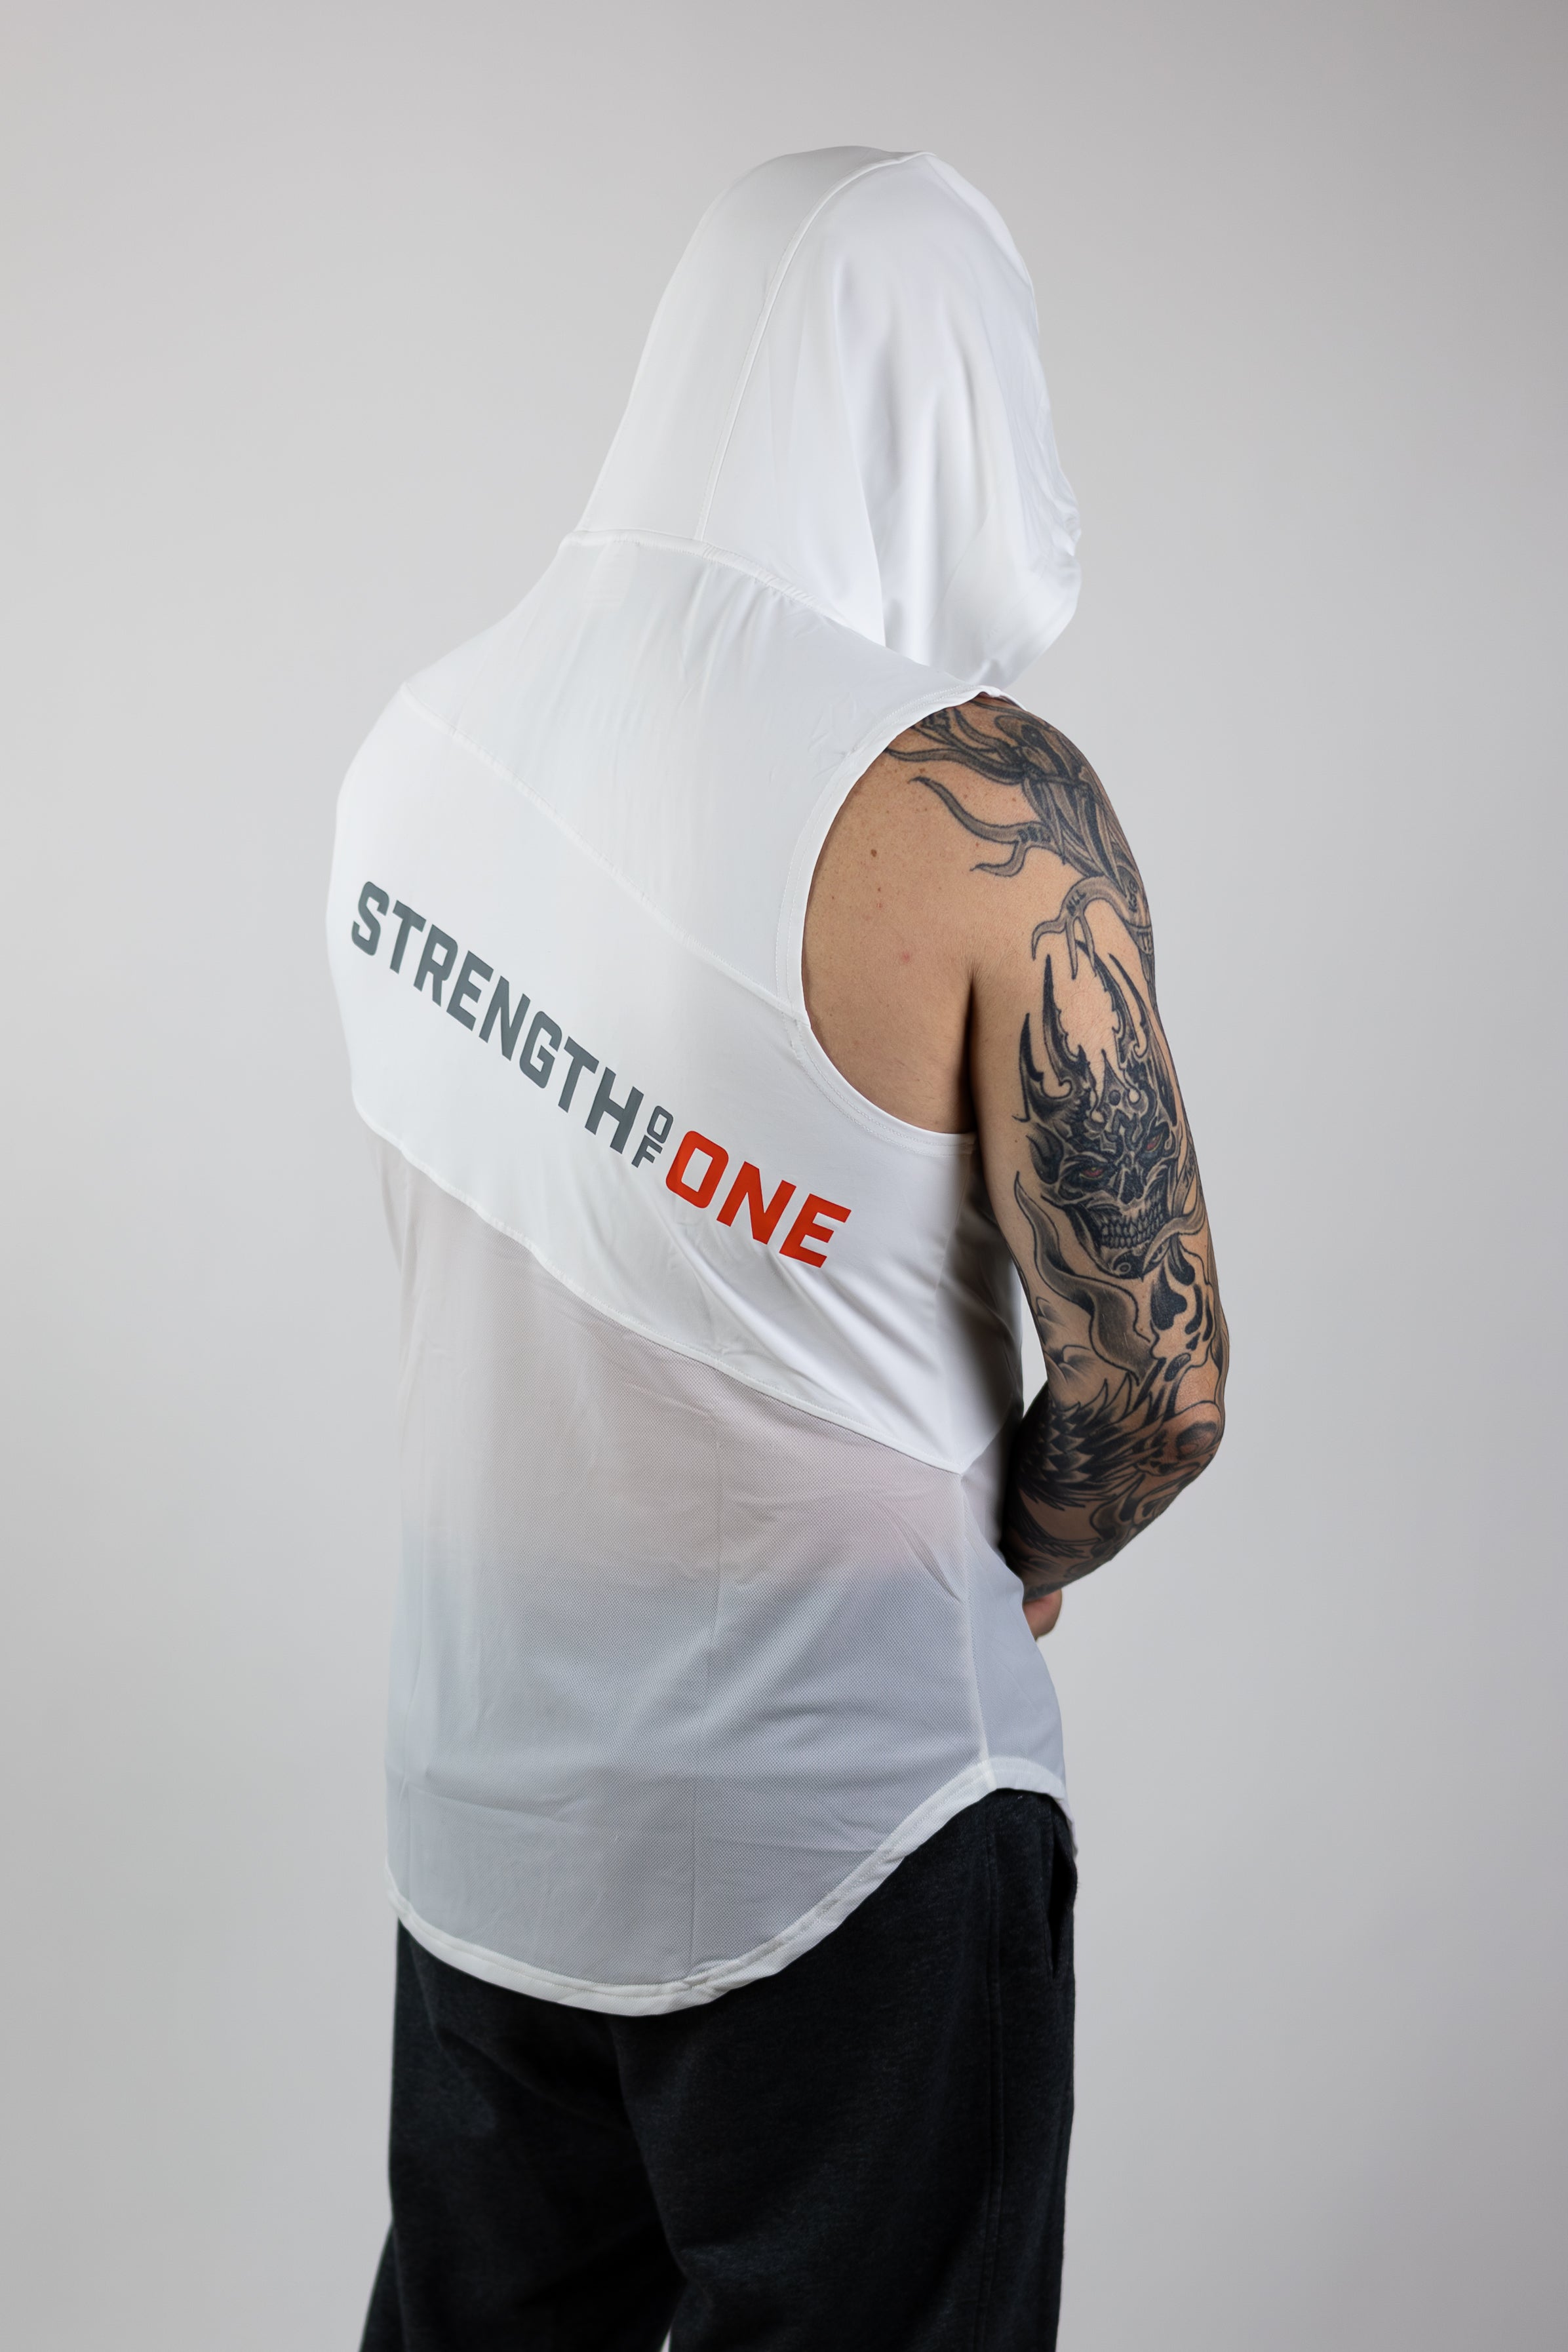 rear view of man wearing white Strength of One hooded tank top with logo angled down back